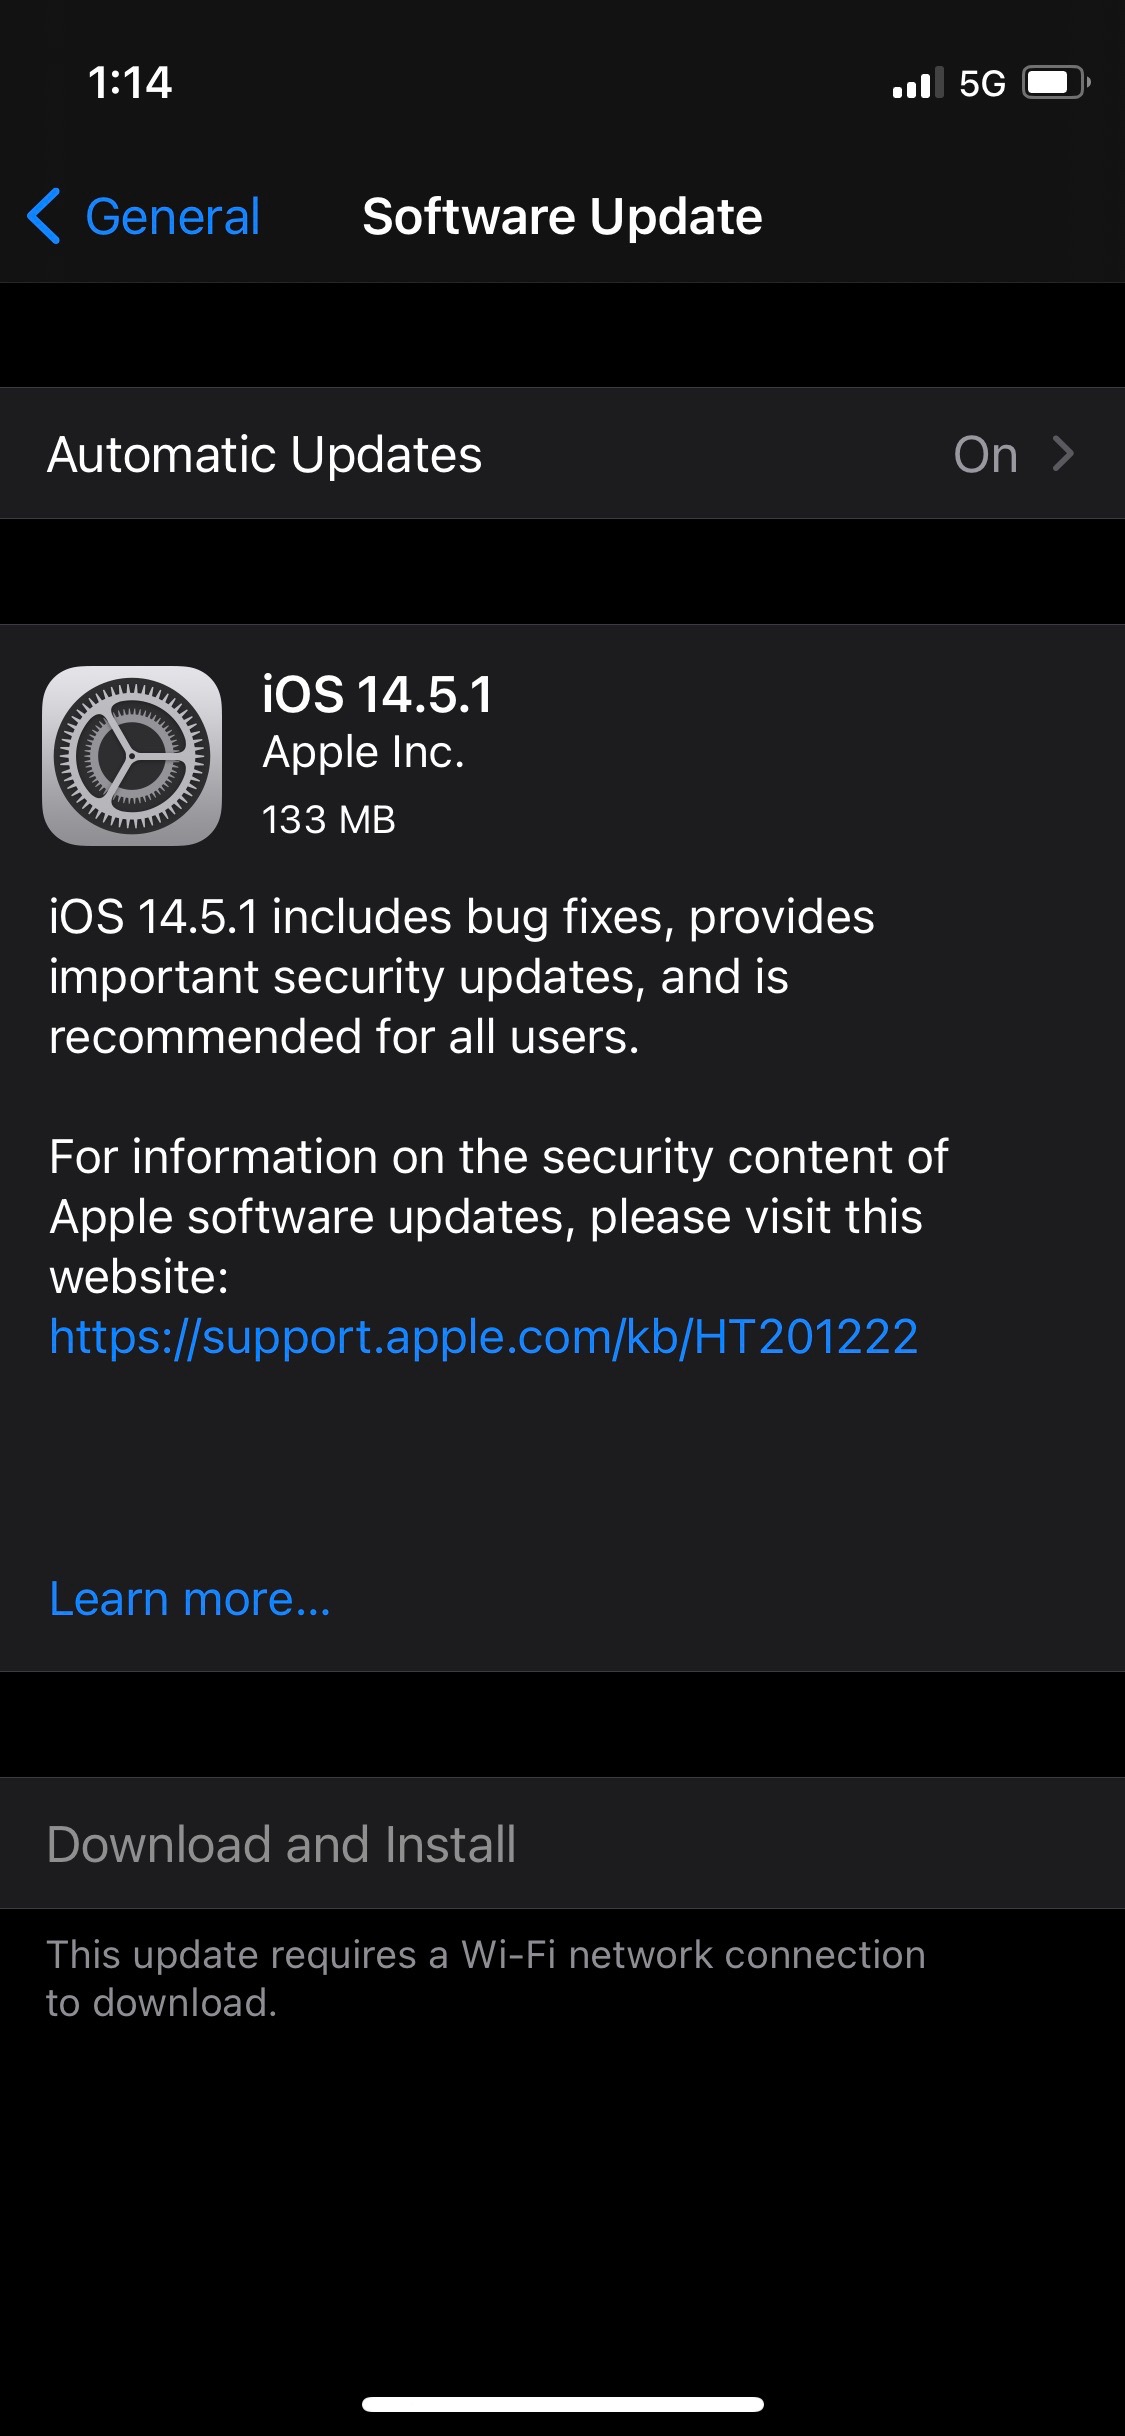 Apple Releases iOS 14.5.1 and iPadOS 14.5.1 [Download]